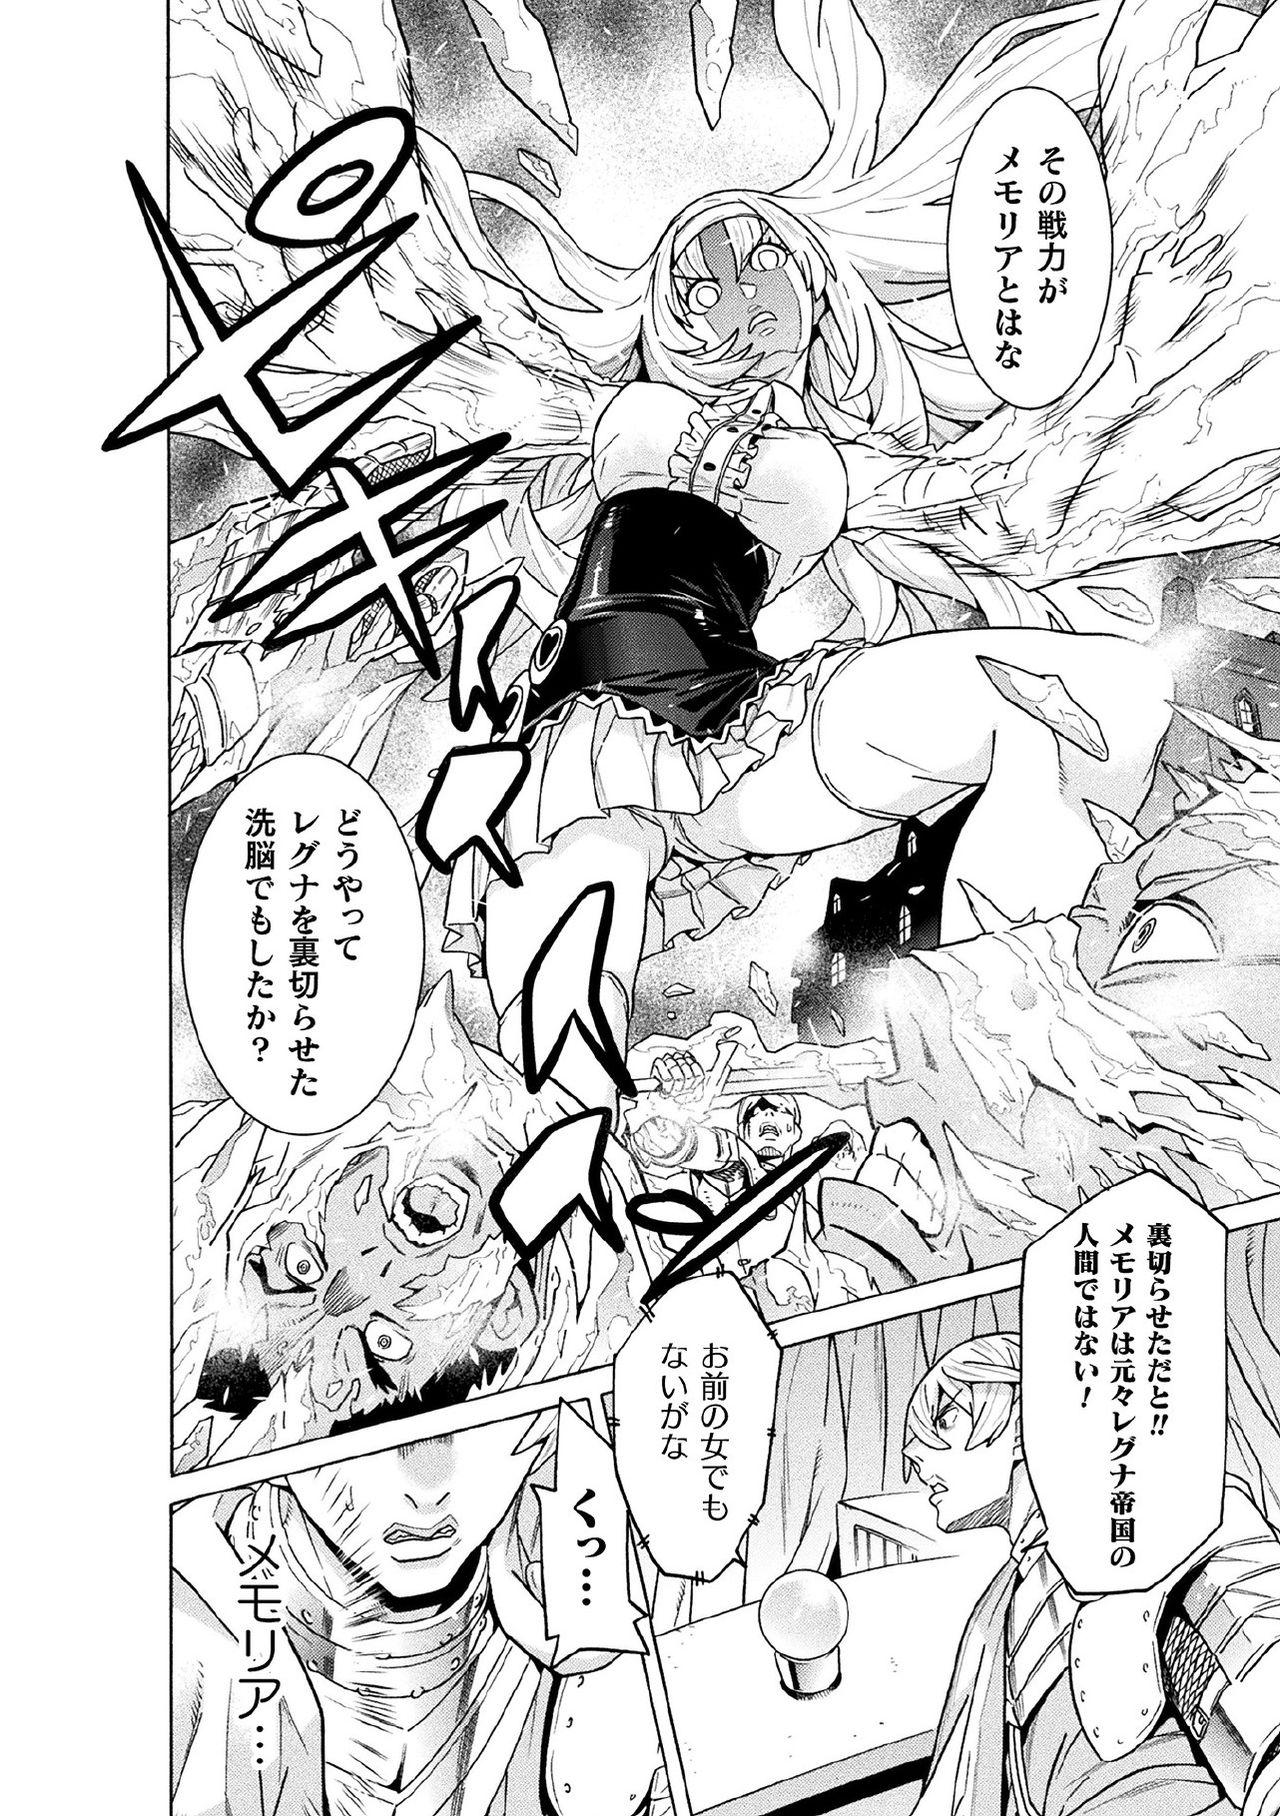 Gaygroup Makenshi Leane the COMIC Episode 6 Best Blow Job - Page 4